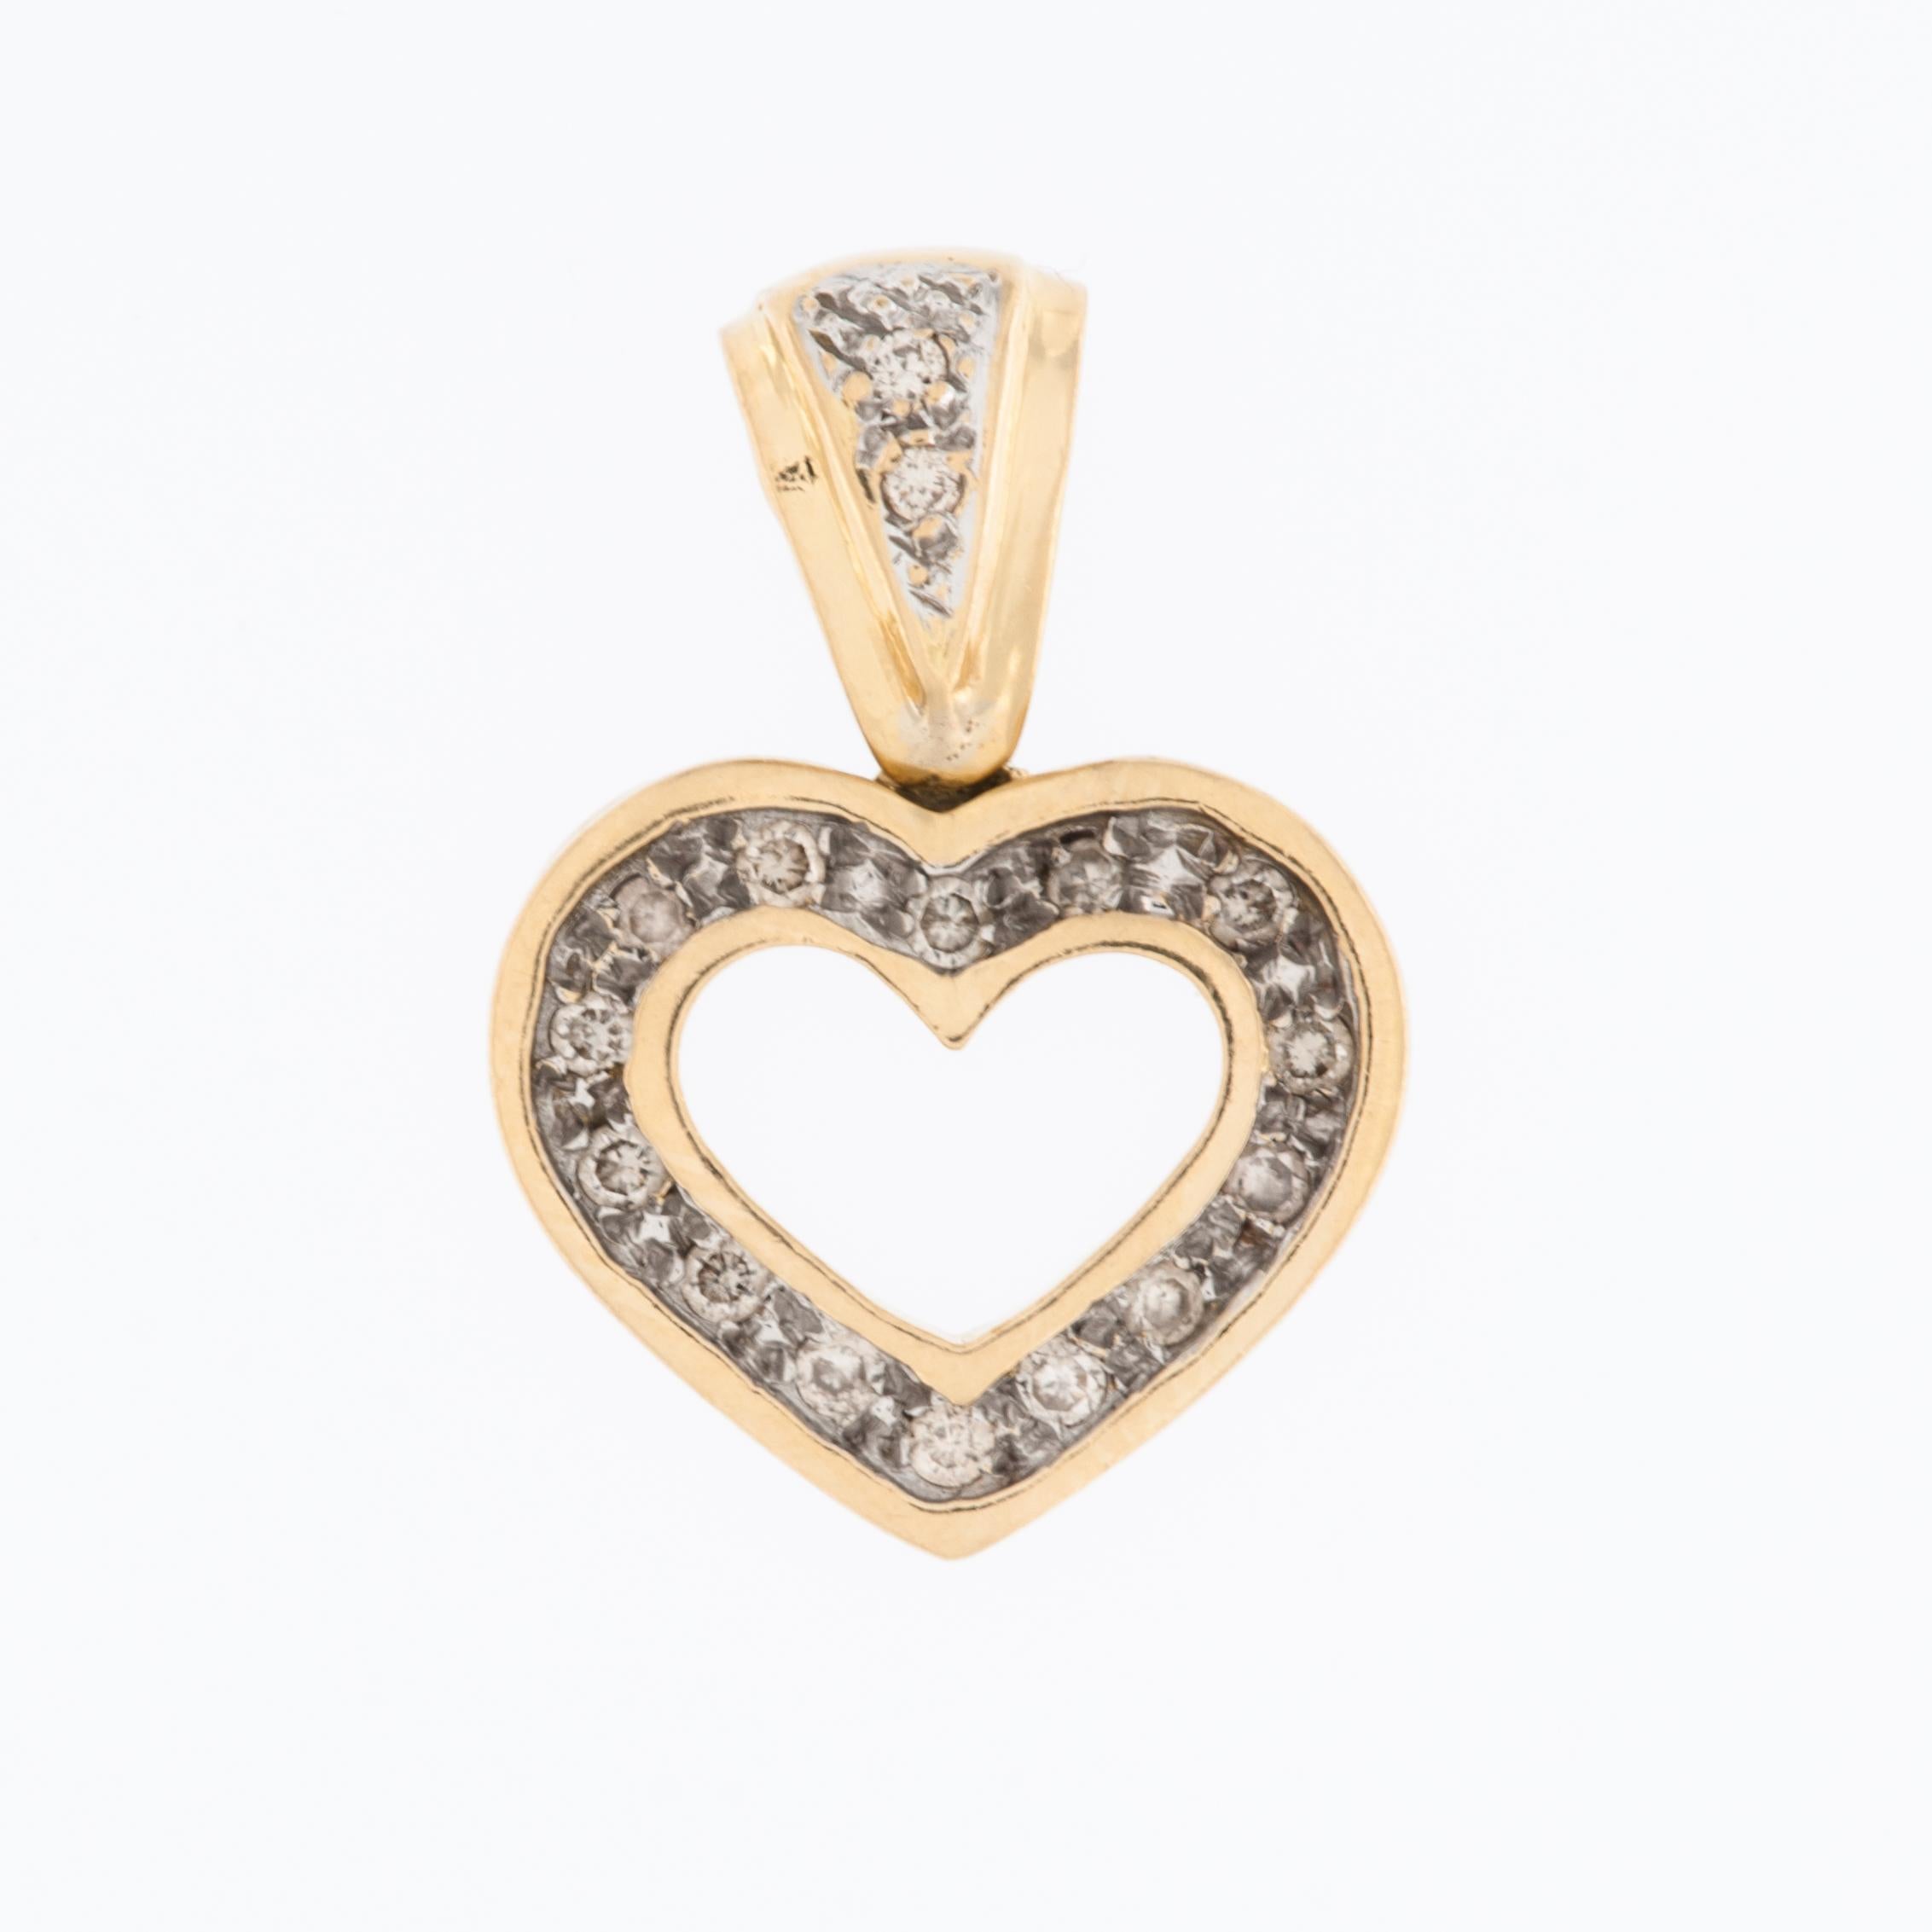 The Open Heart Diamond Pendant in 18kt Yellow and White Gold is a striking and elegant piece of jewelry that seamlessly blends classic design with a touch of contemporary flair. Crafted from high-quality 18kt gold, this pendant features an open